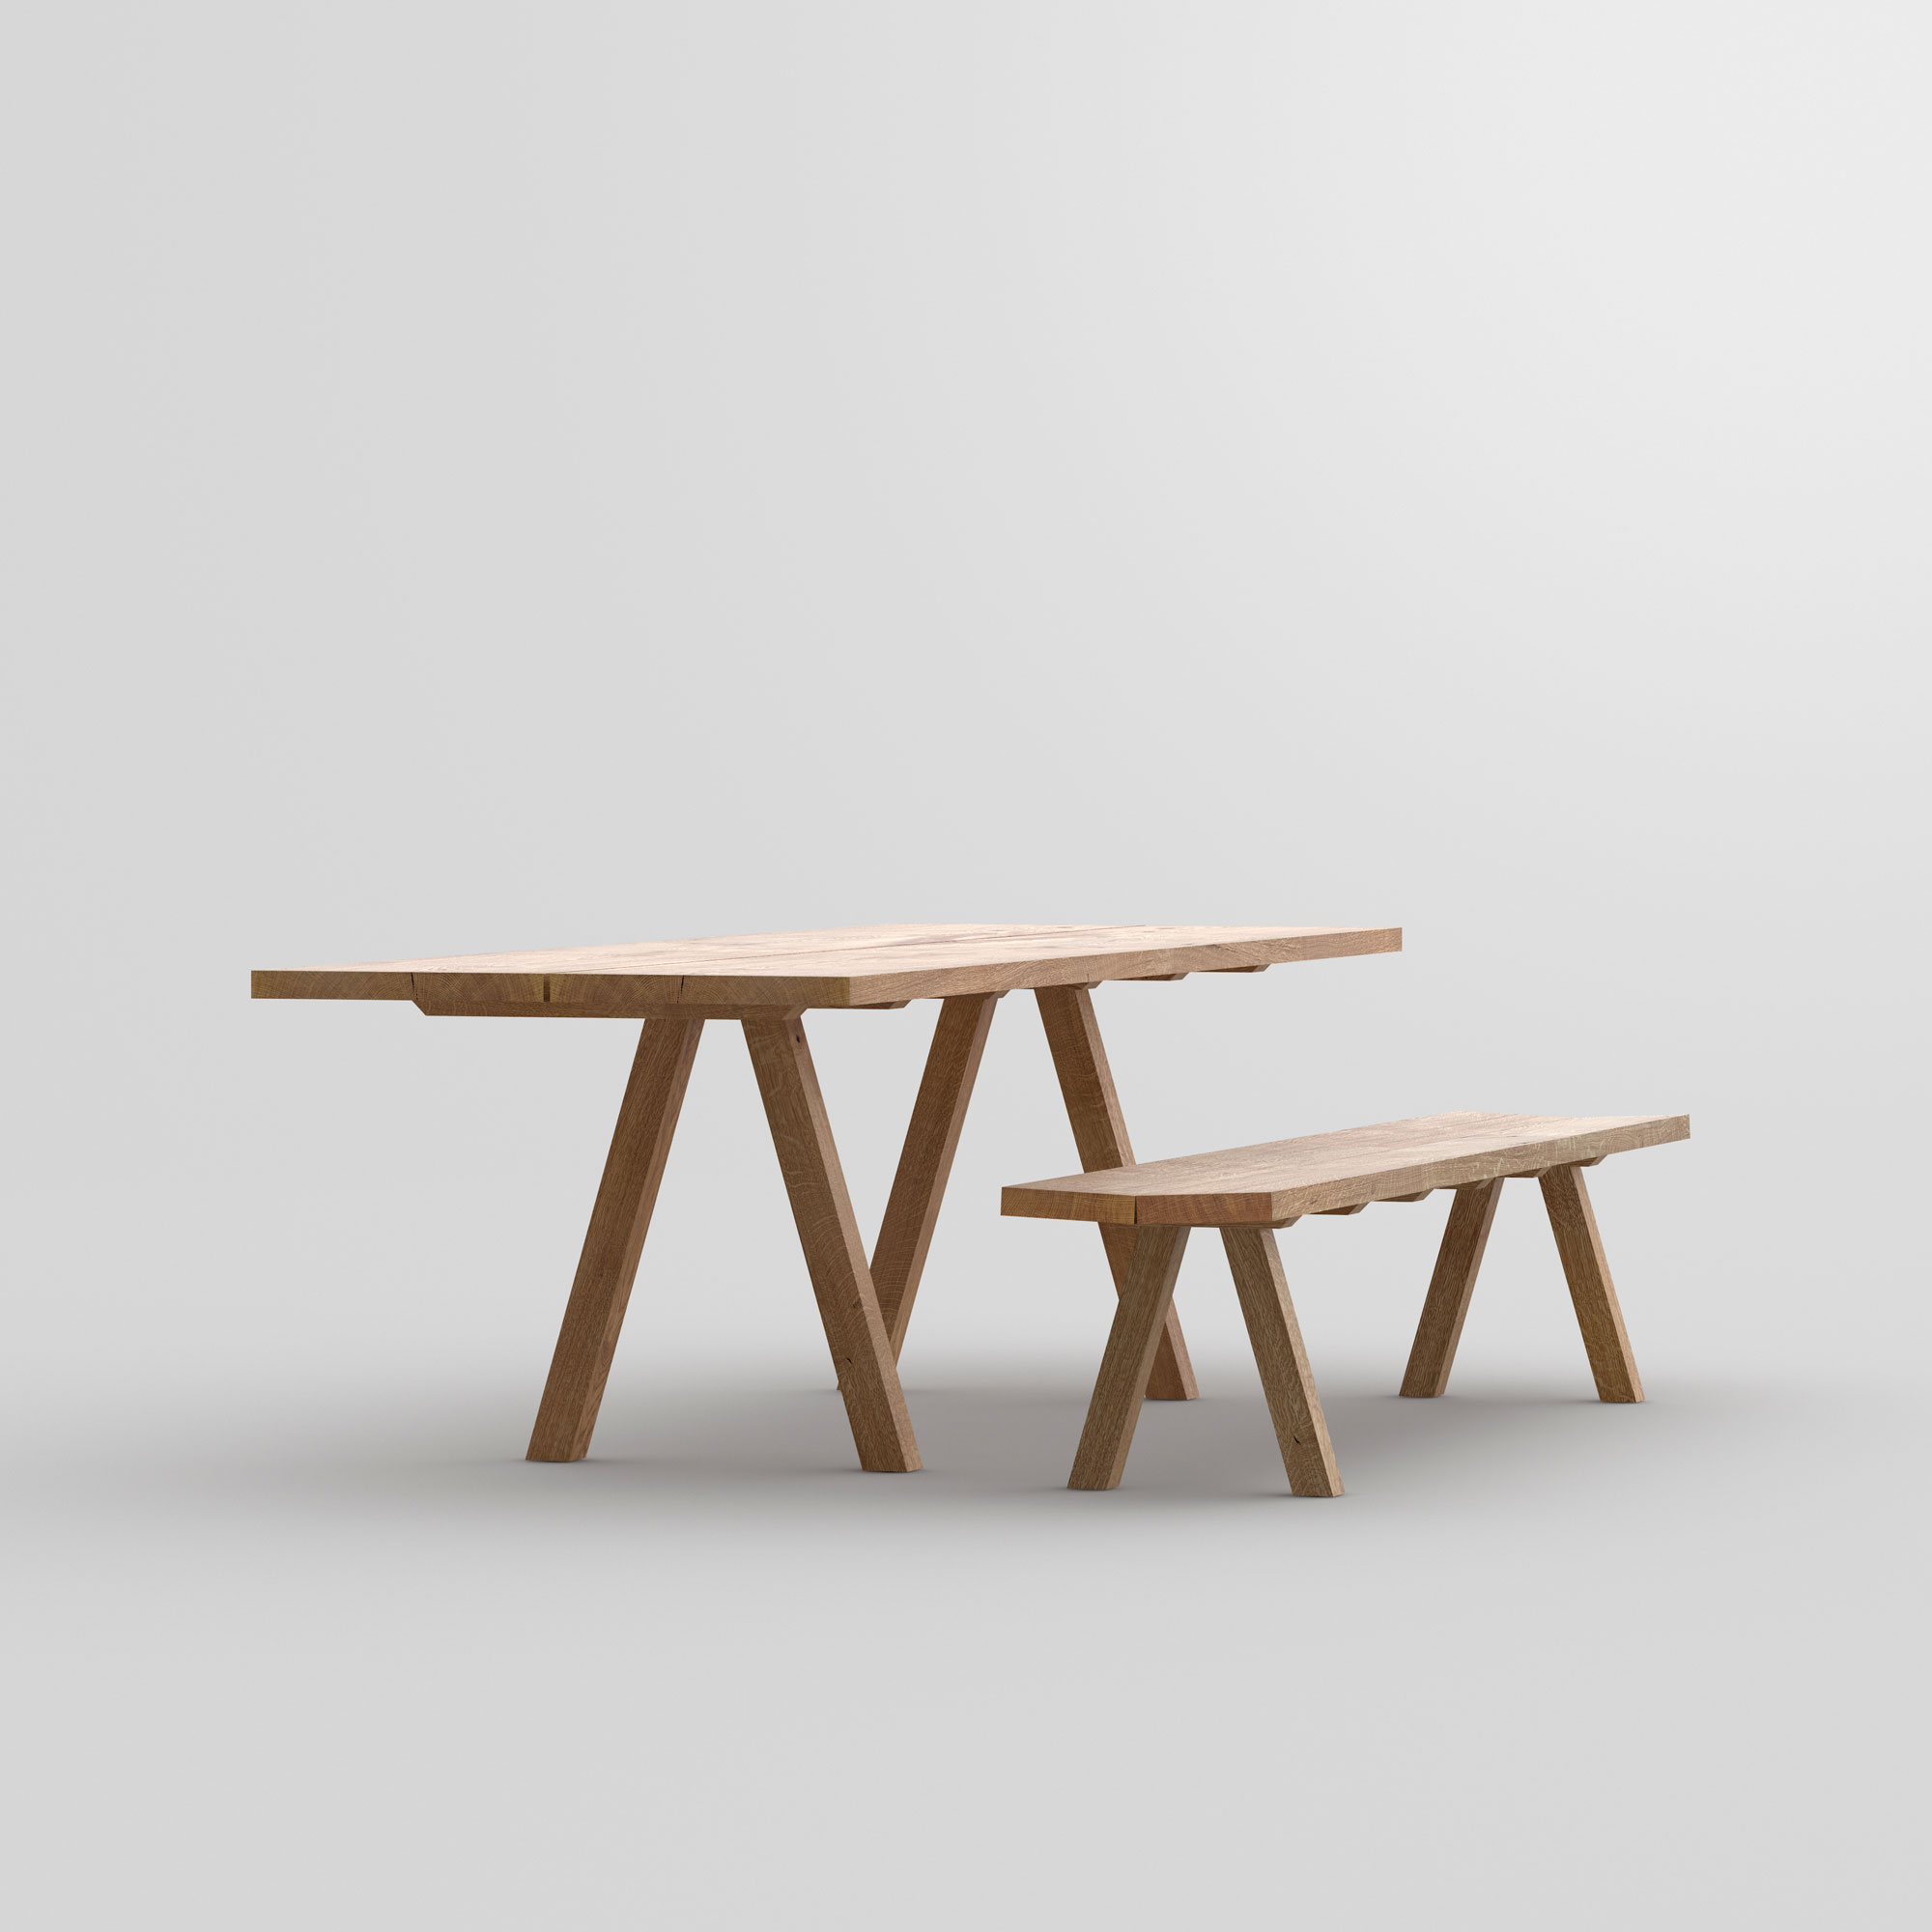 Wooden Designer Bench PAPILIO SIMPLE cam3 custom made in solid wood by vitamin design